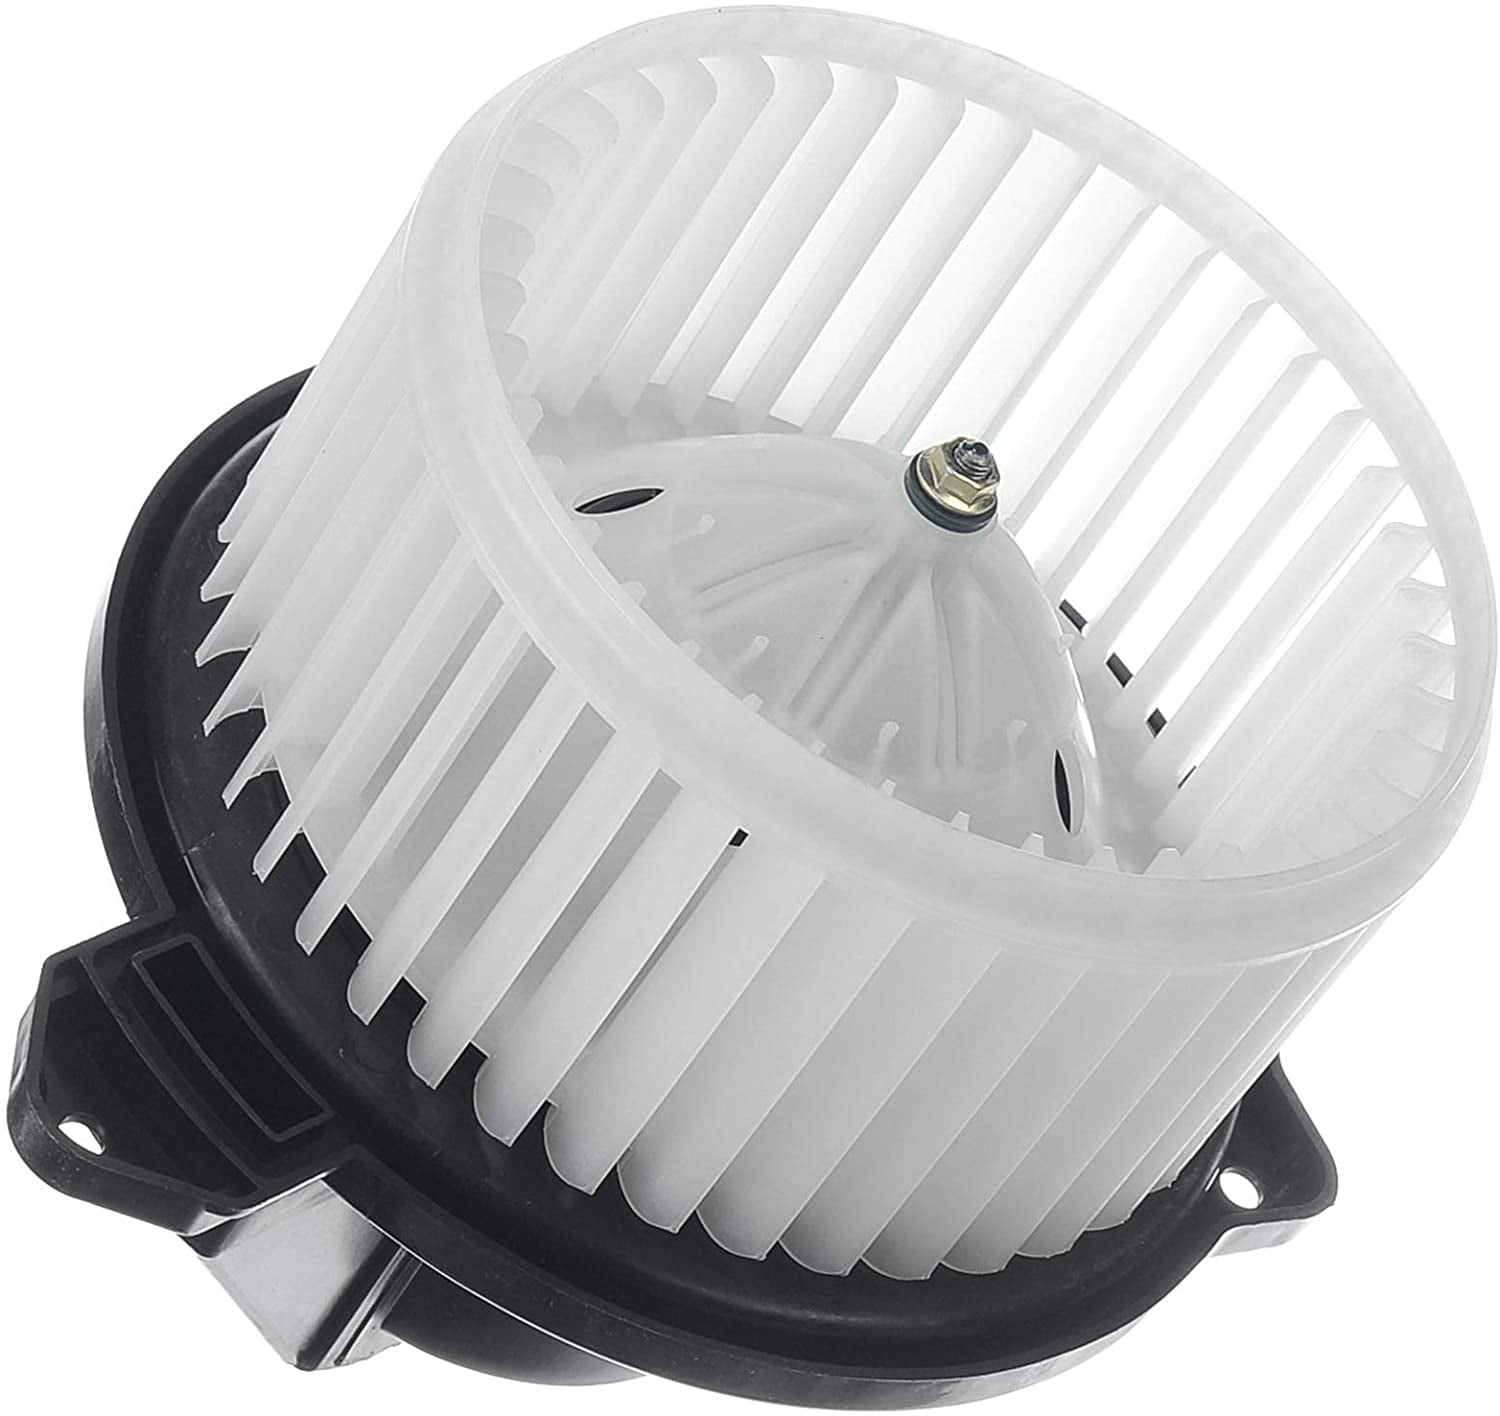 HVAC Blower Motor with Fan for 1994-2002 Dodge Ram 1500 2500 3500 & 1993-1998 Jeep Grand Cherokee Replaces 700010 4778417 5015866AA 